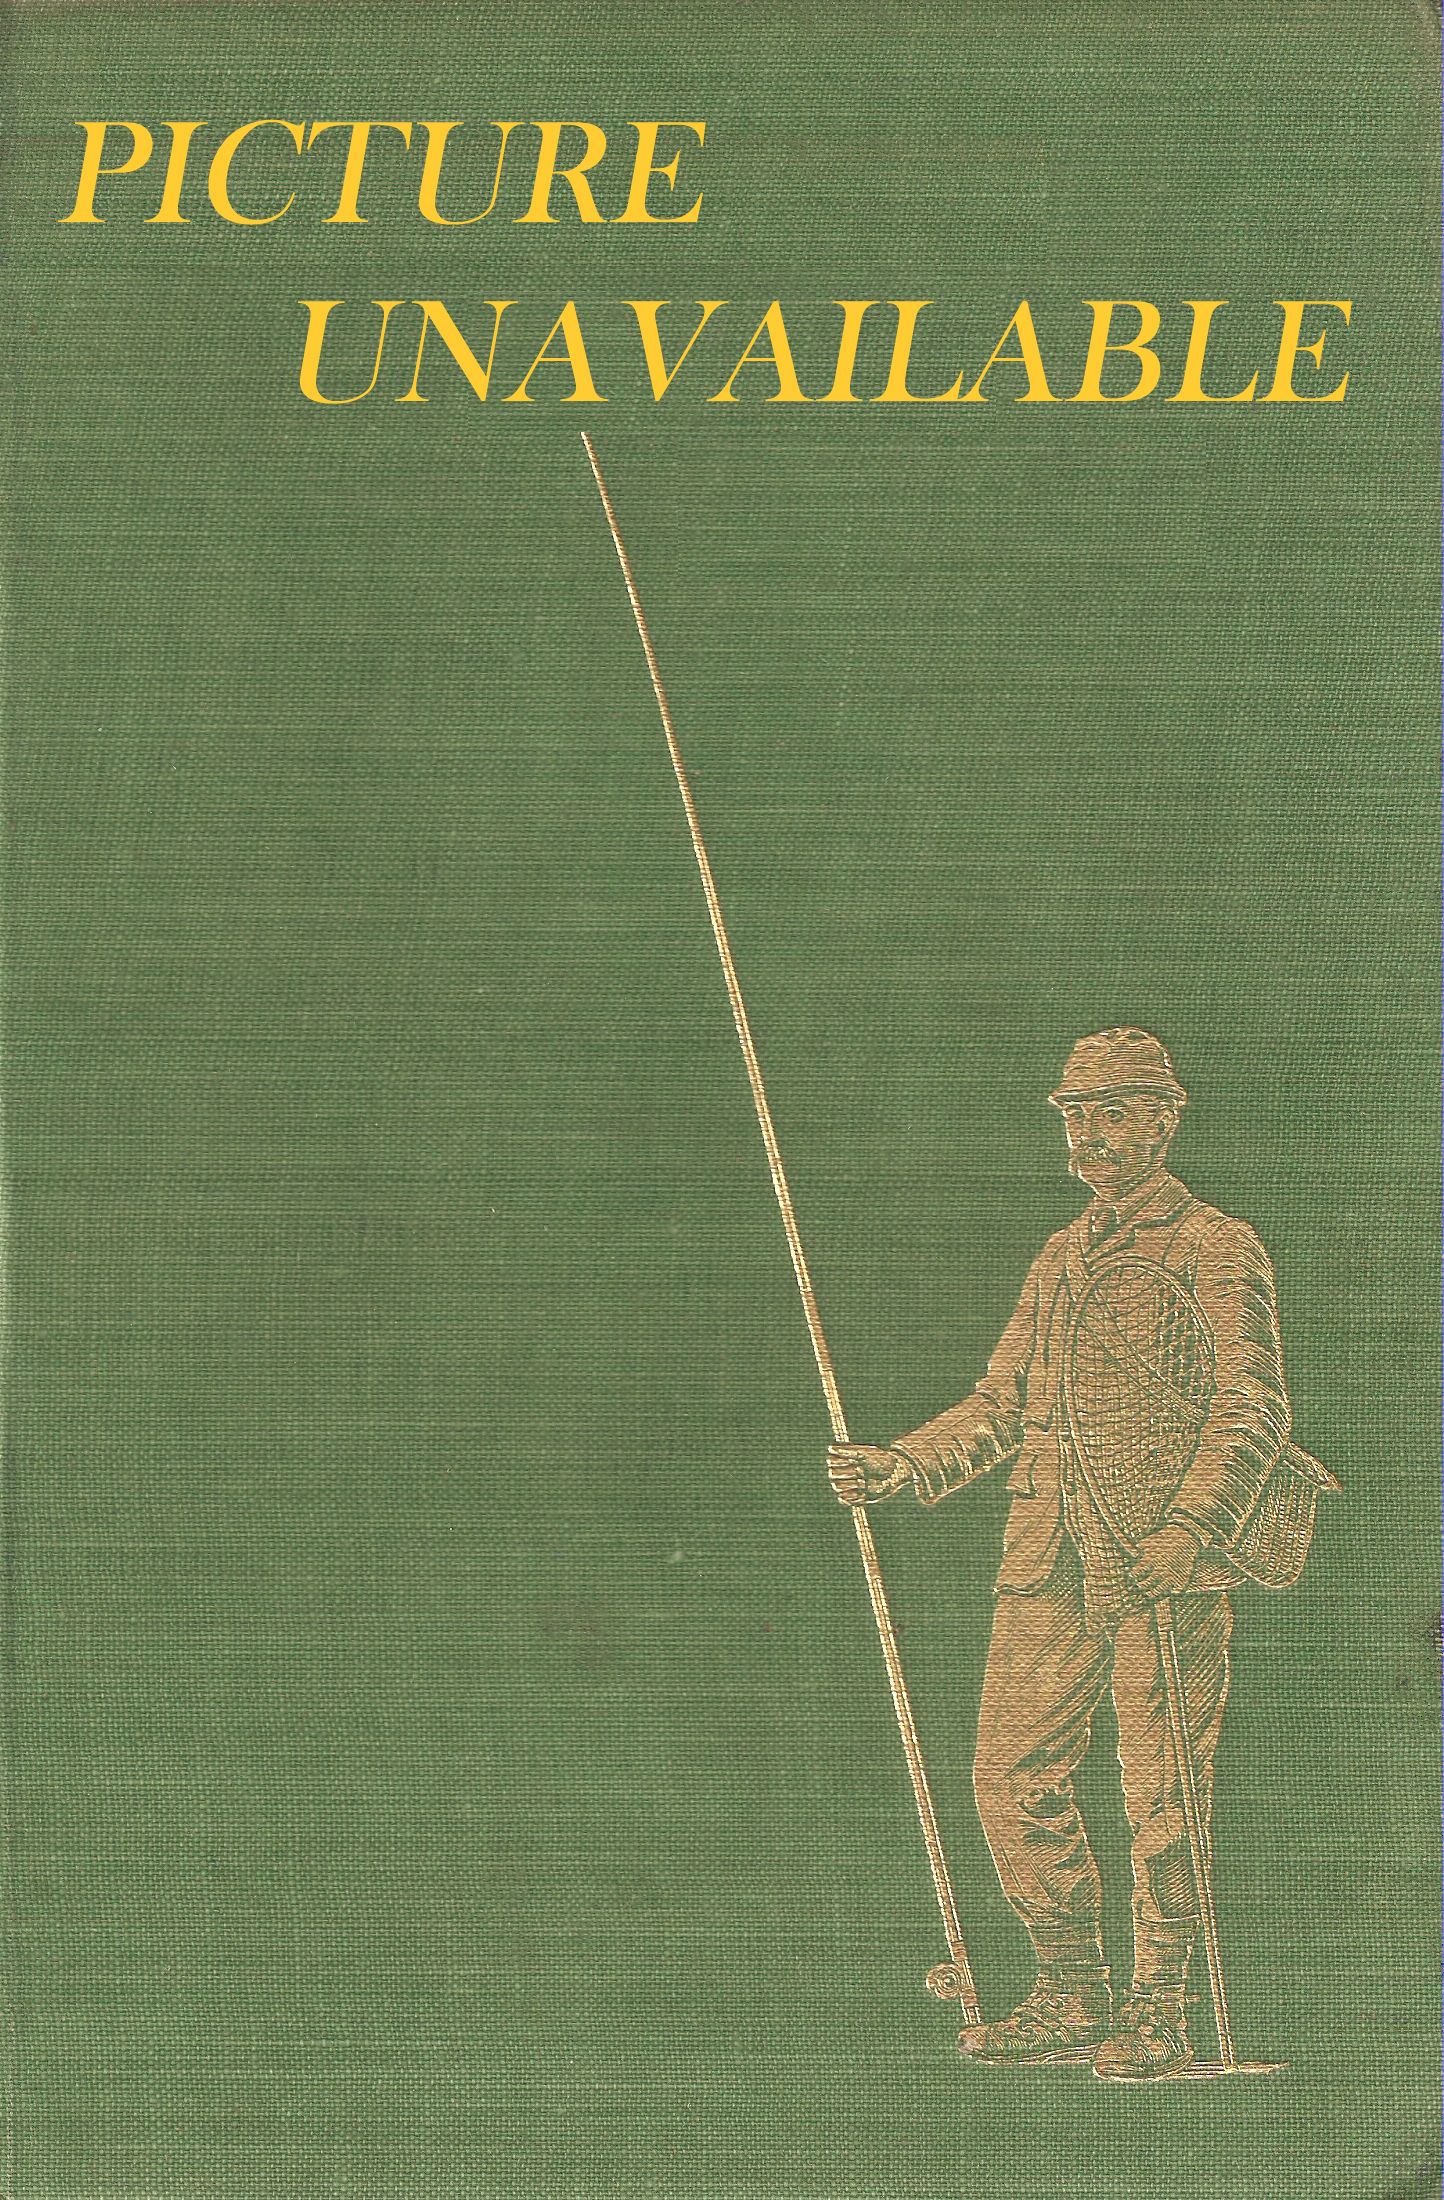 THE ANGLER'S GAZETTEER. Compiled and edited by Graham Fisher.